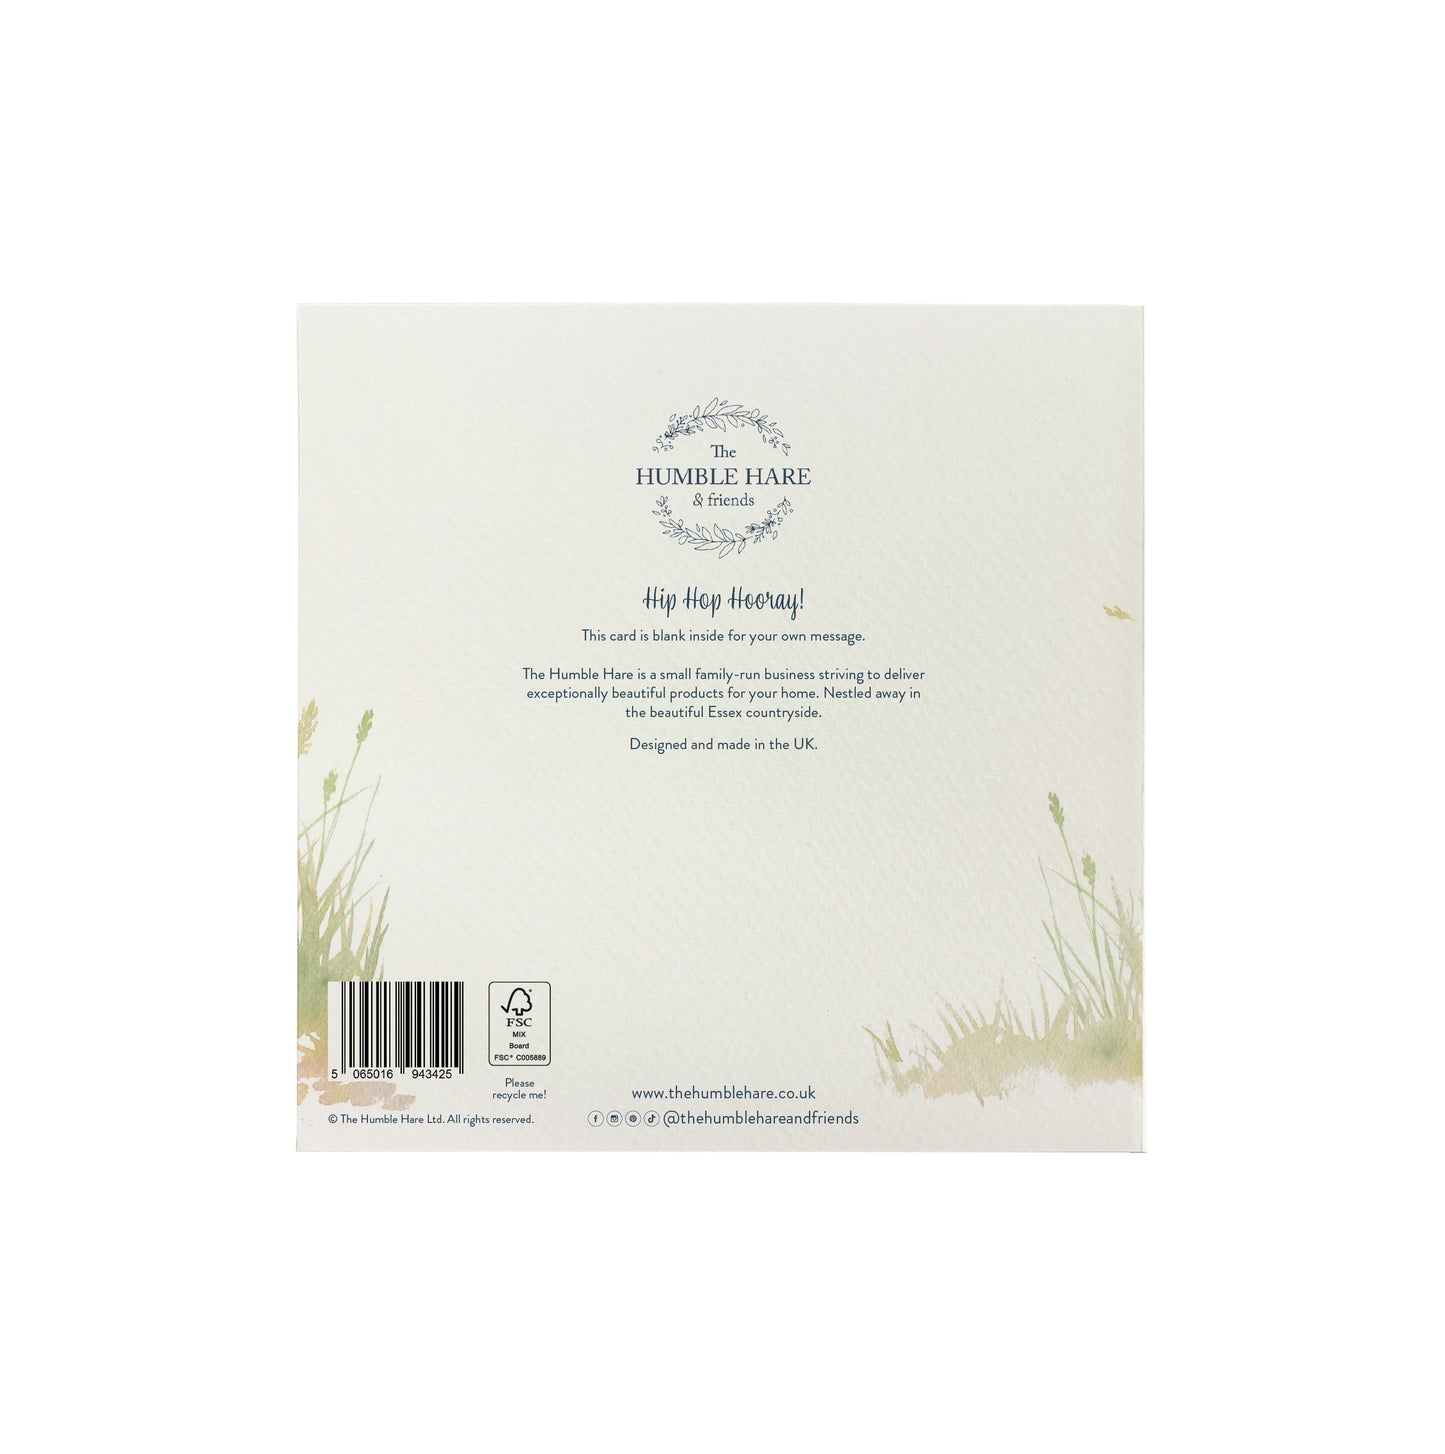 The back of a greetings card showing that the watercolour design wraps around onto the back of the card. The back of the card shows The Humble Hare logo and that the card is FSC certified.